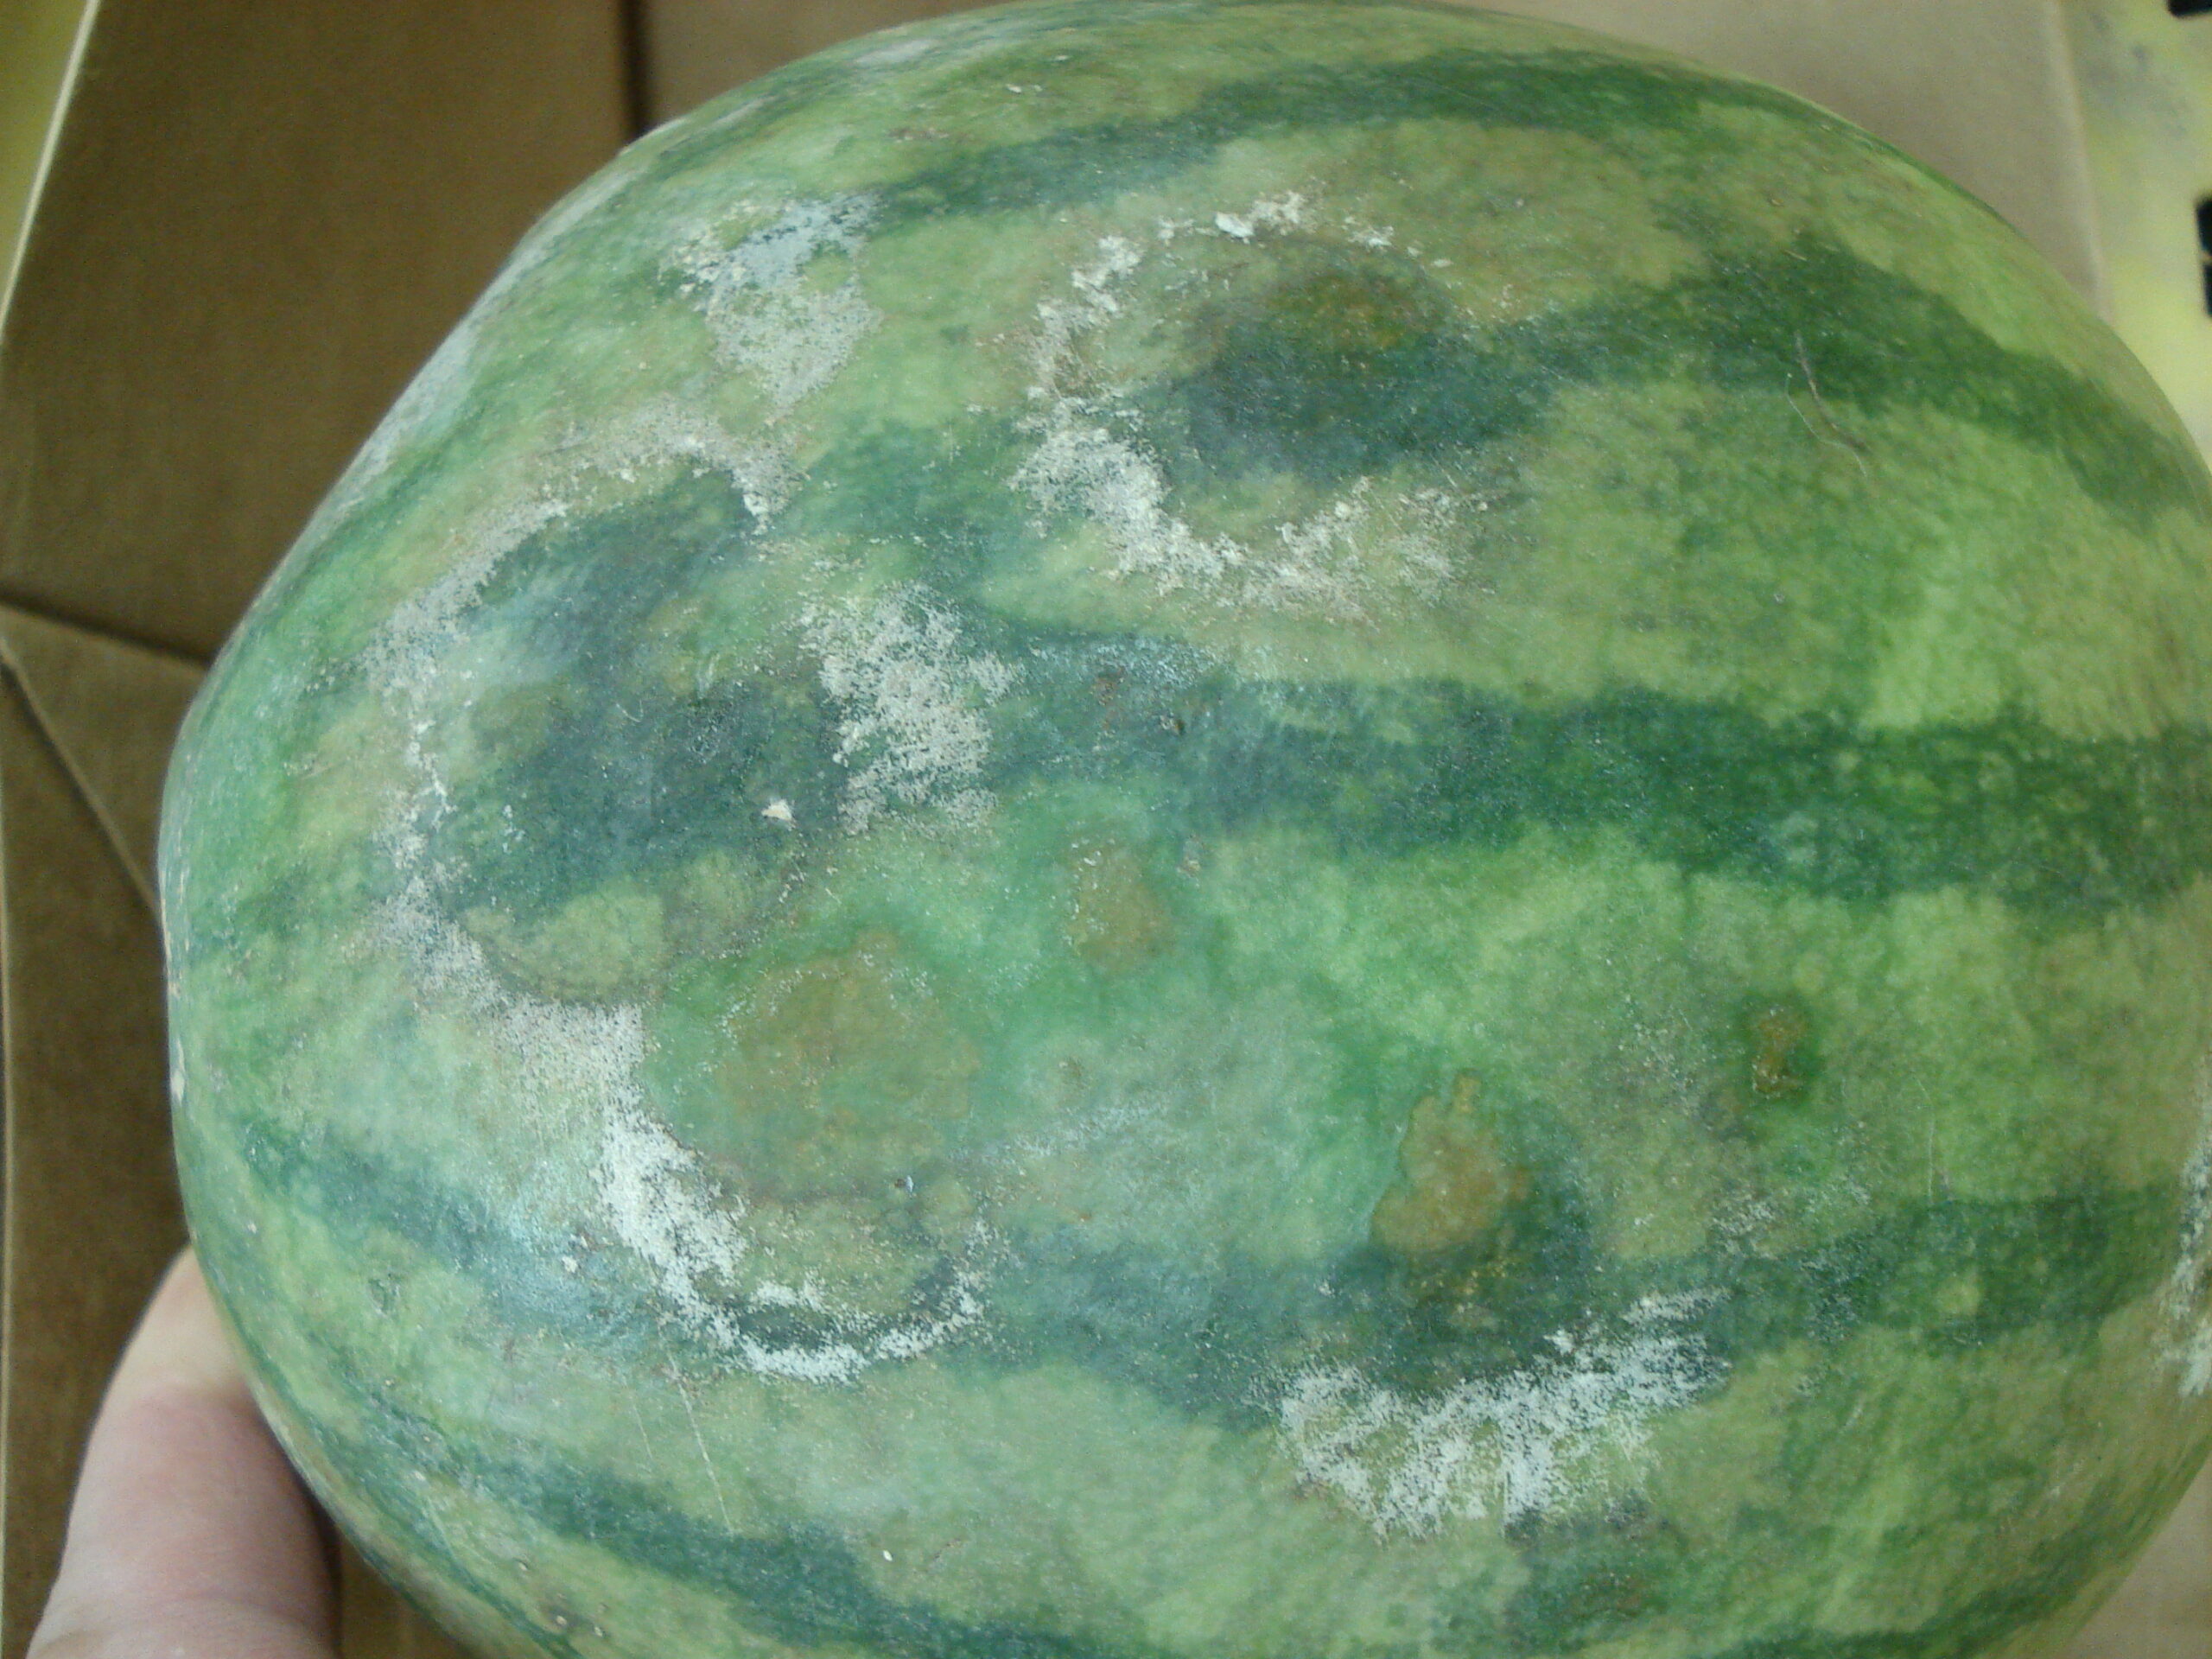 Phytophthora-infected watermelon fruit